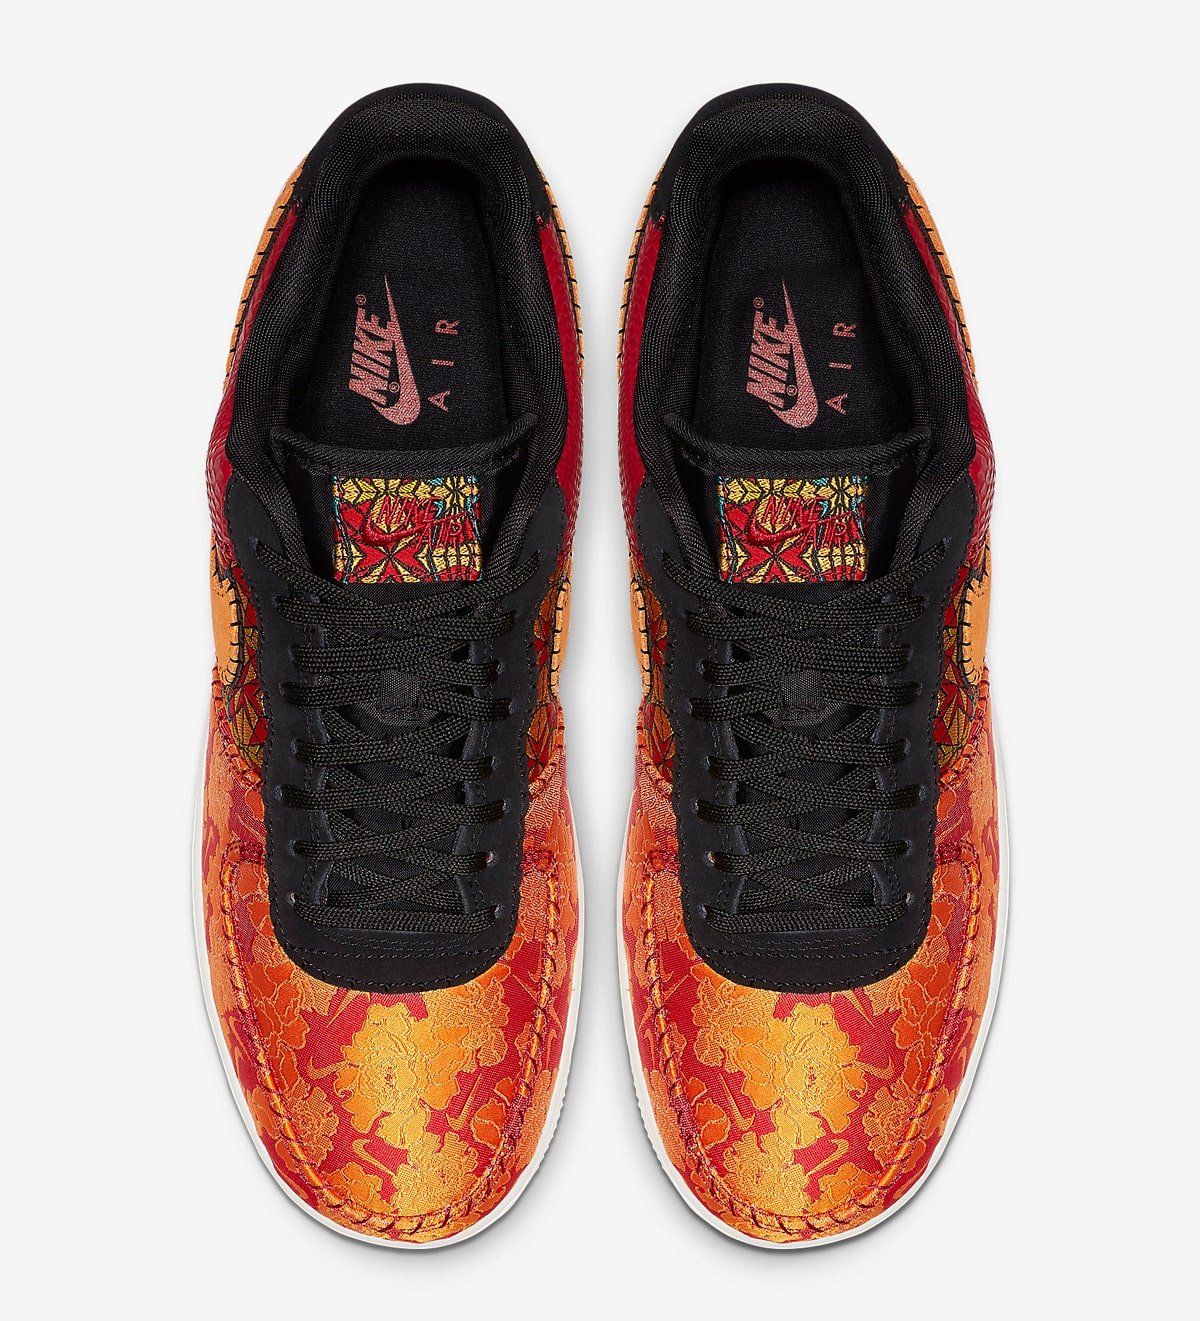 The Nike Air Force 1 Low “Chinese New Year” Will Finally be Releasing